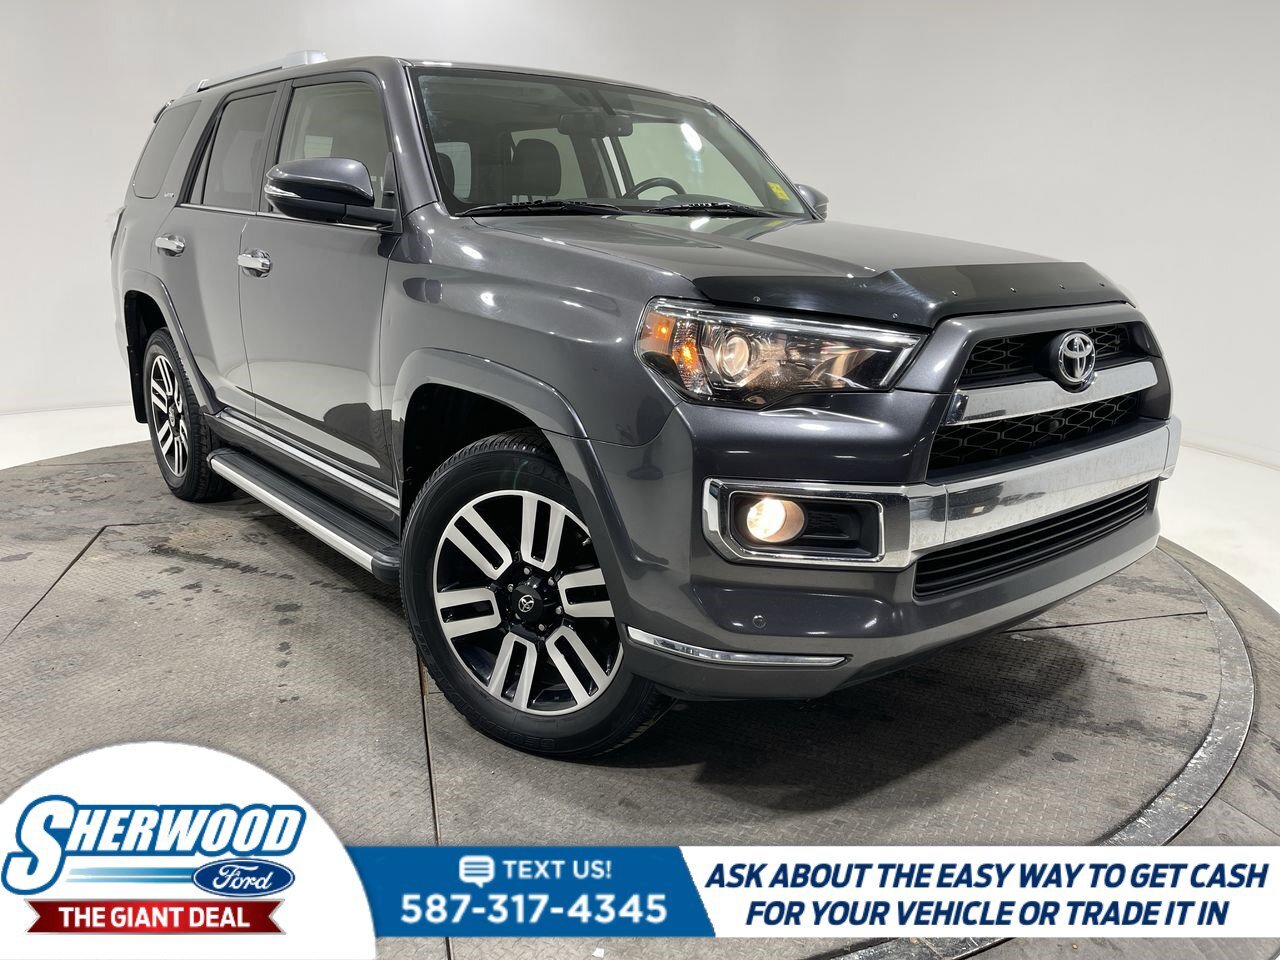 2017 Toyota 4Runner SR5 $0 Down $204 Weekly- NEW TIRES & BATTERY